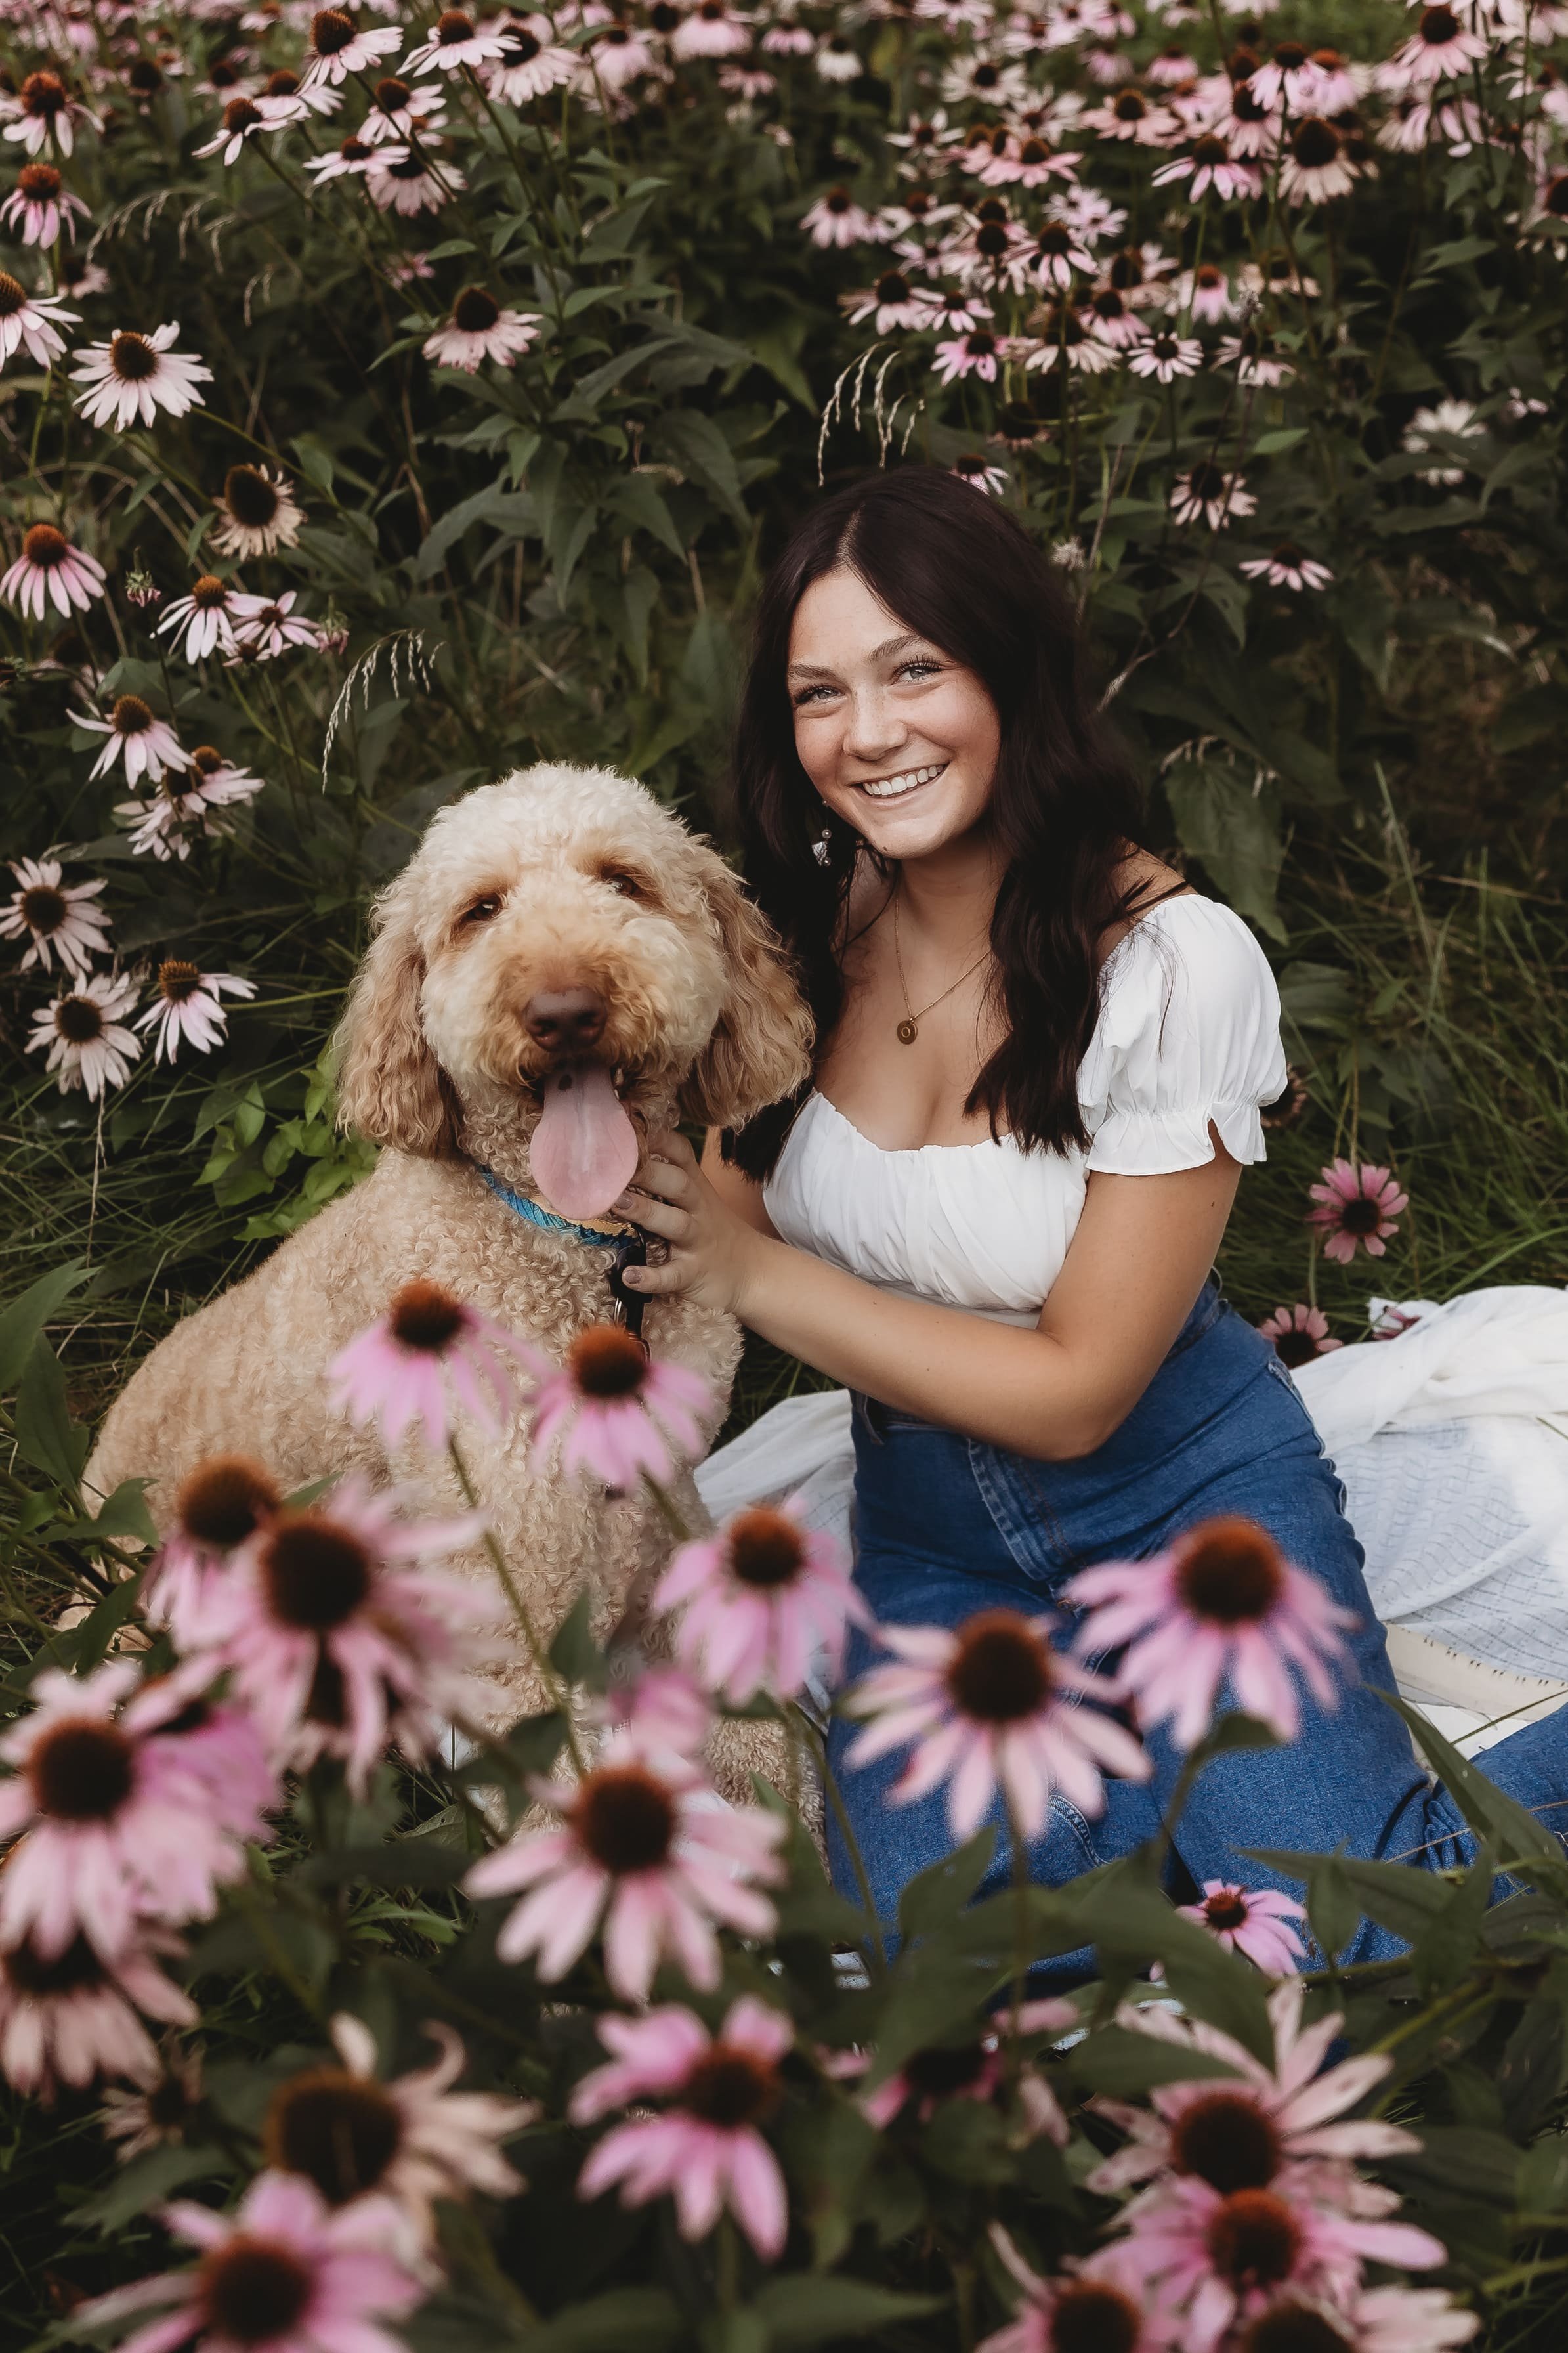  olivia and her dog post for senior pictures near me in a grassy pocket in the middle of a large bunch of flowers 